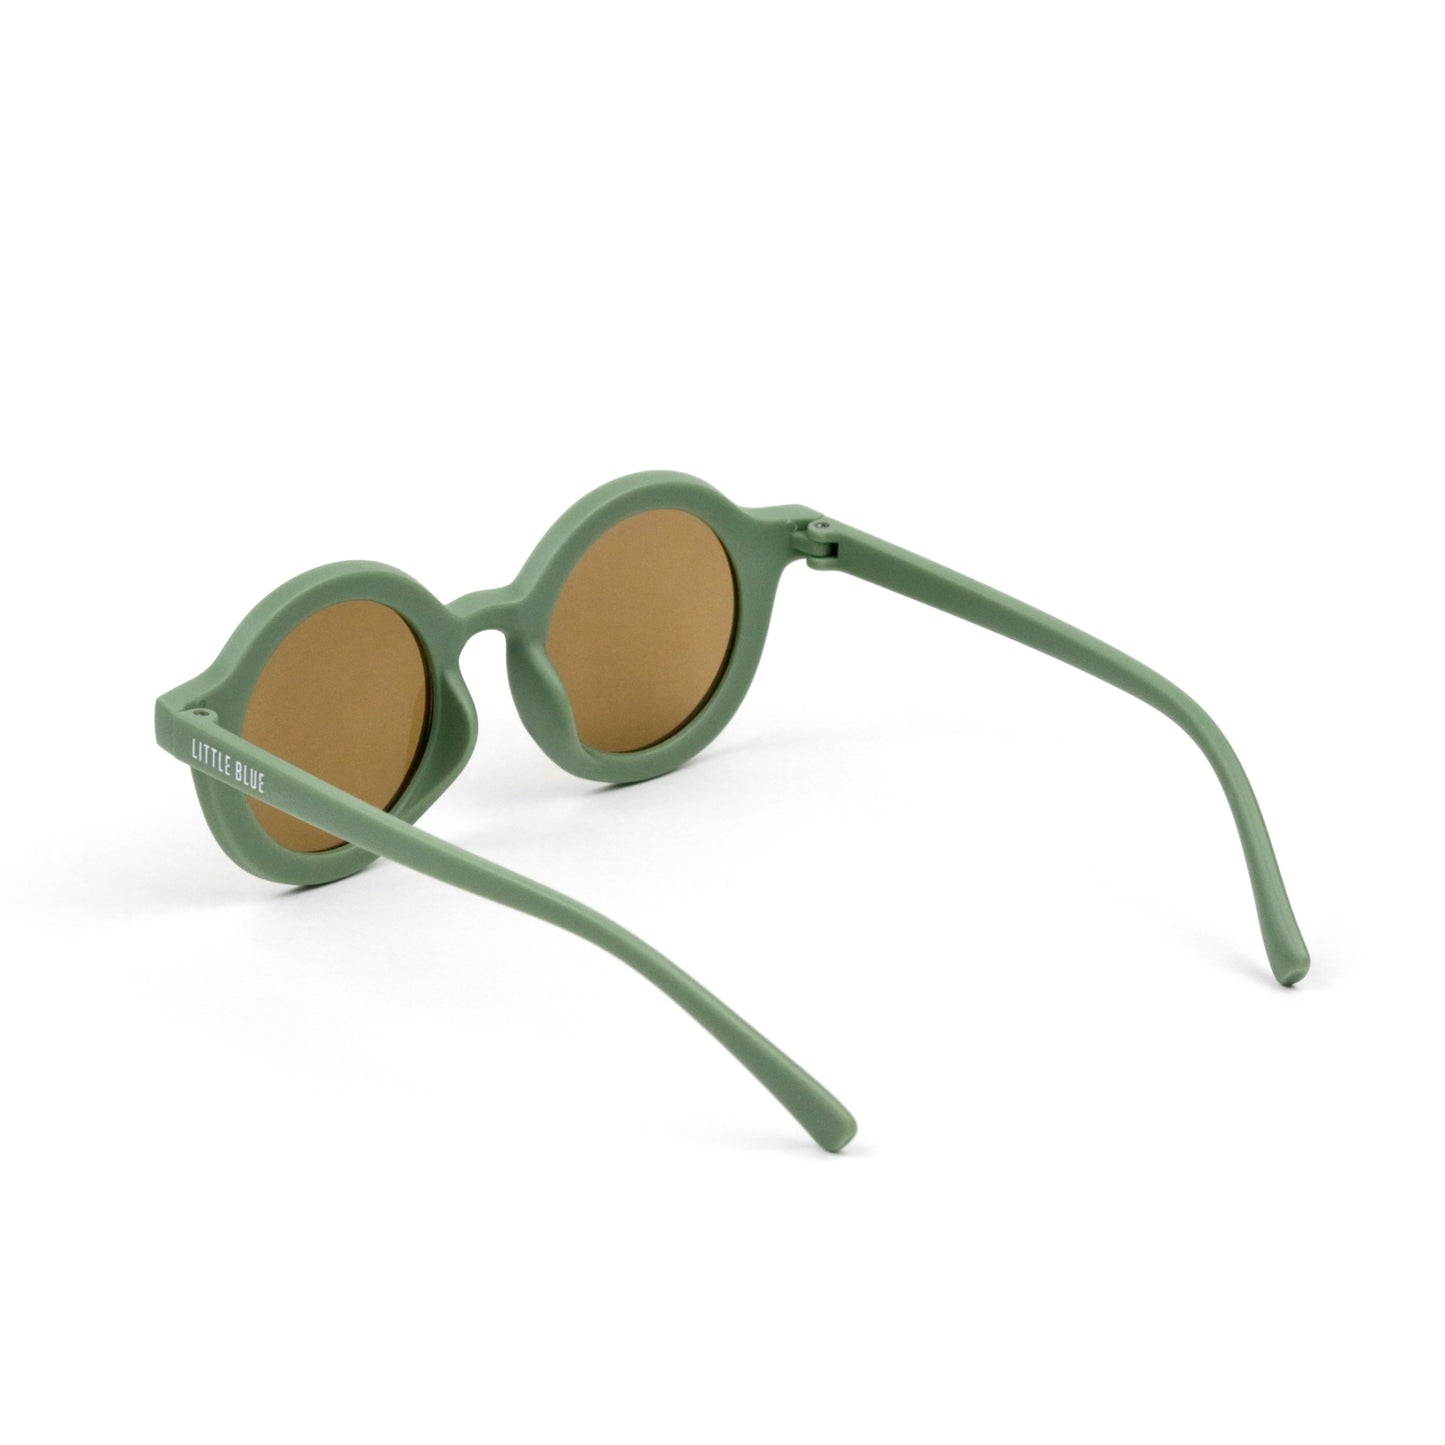 Little Blue Toddler Sunglasses Recycled Plastic UV400 Protection - Sage